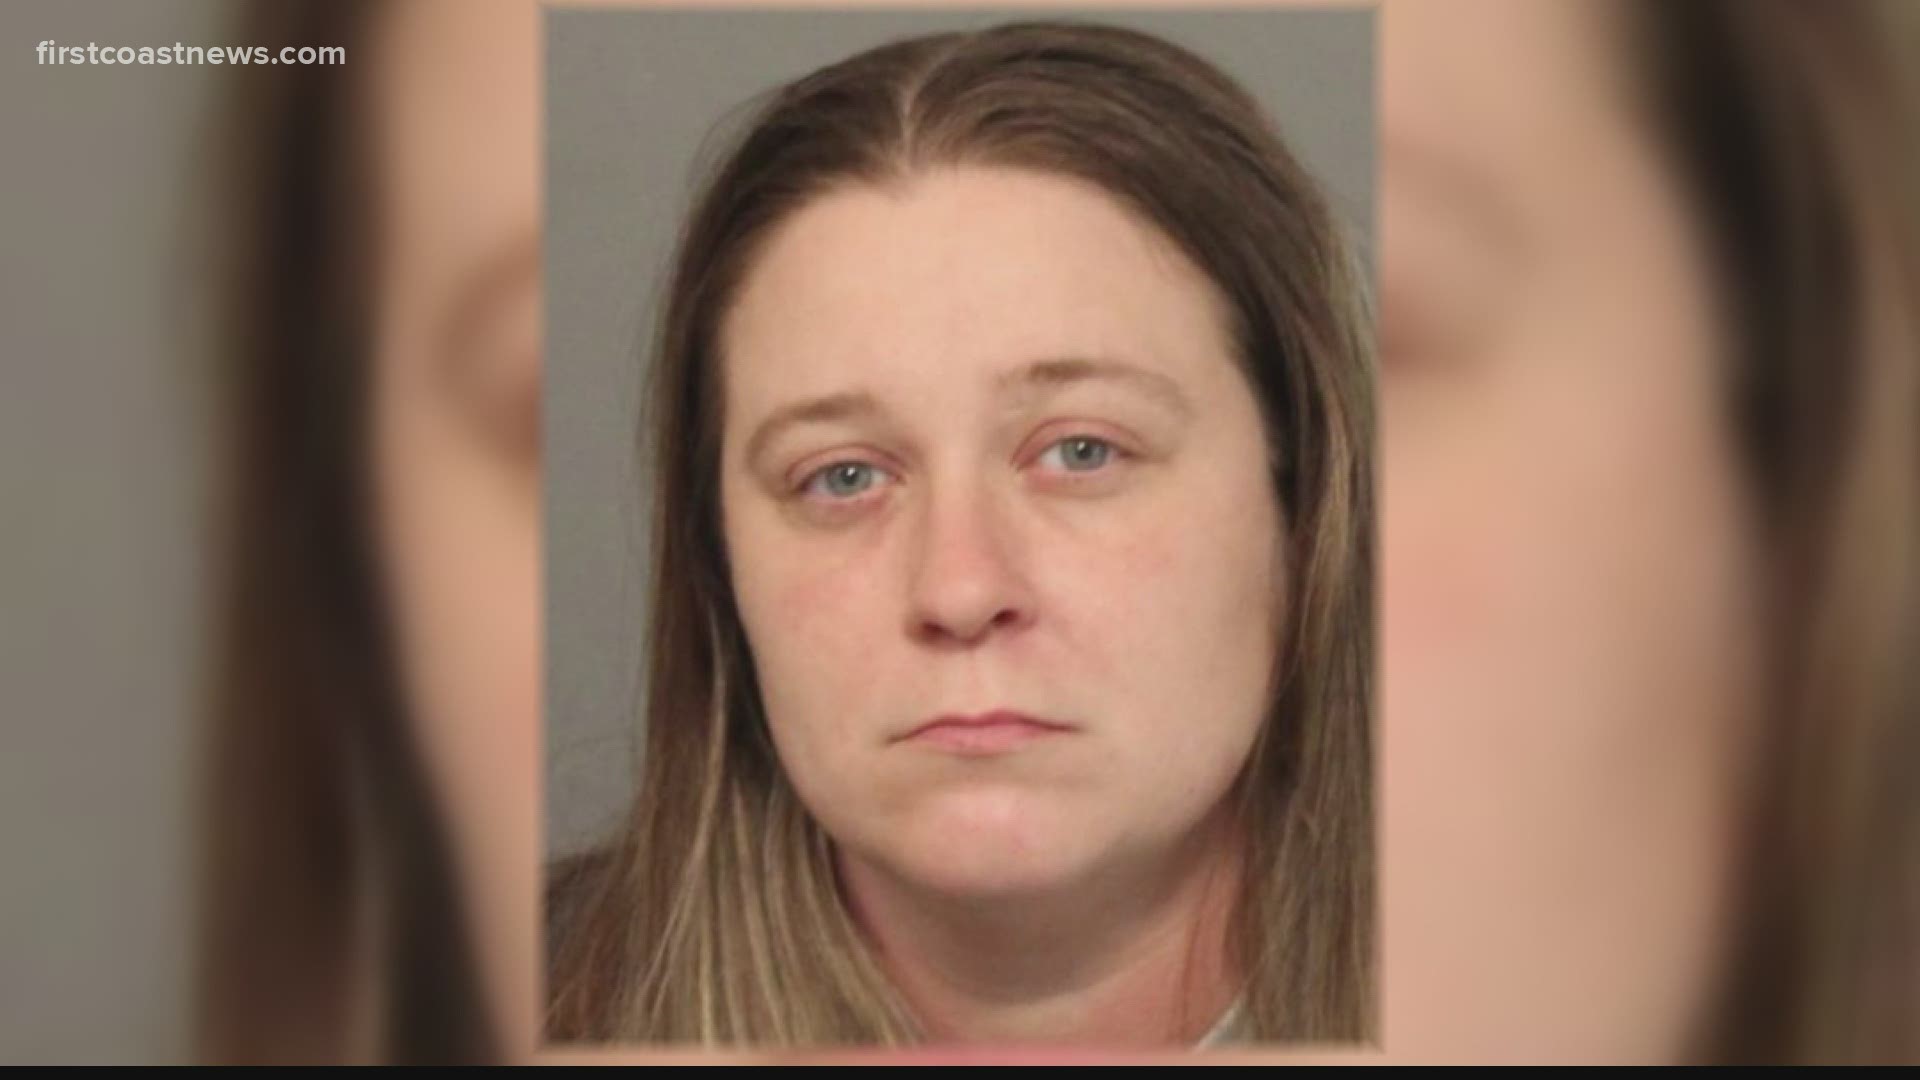 Police: Mother arrested in connection to shooting of 14-year-old daughter in Jacksonville